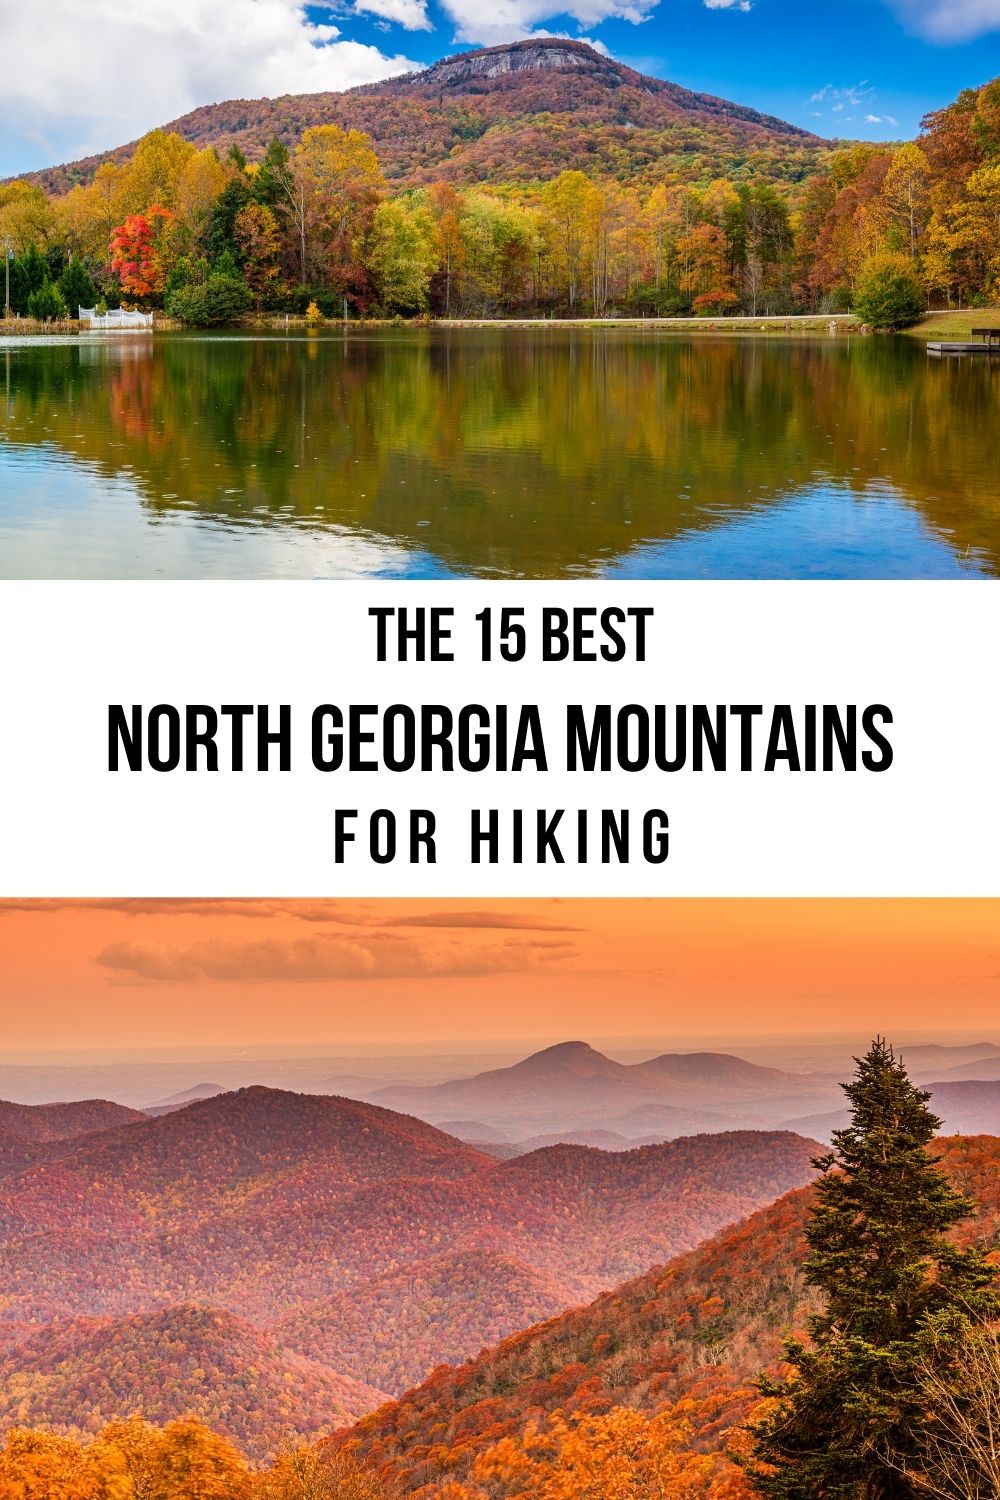 The 15 Best North Georgia Mountains for Hiking